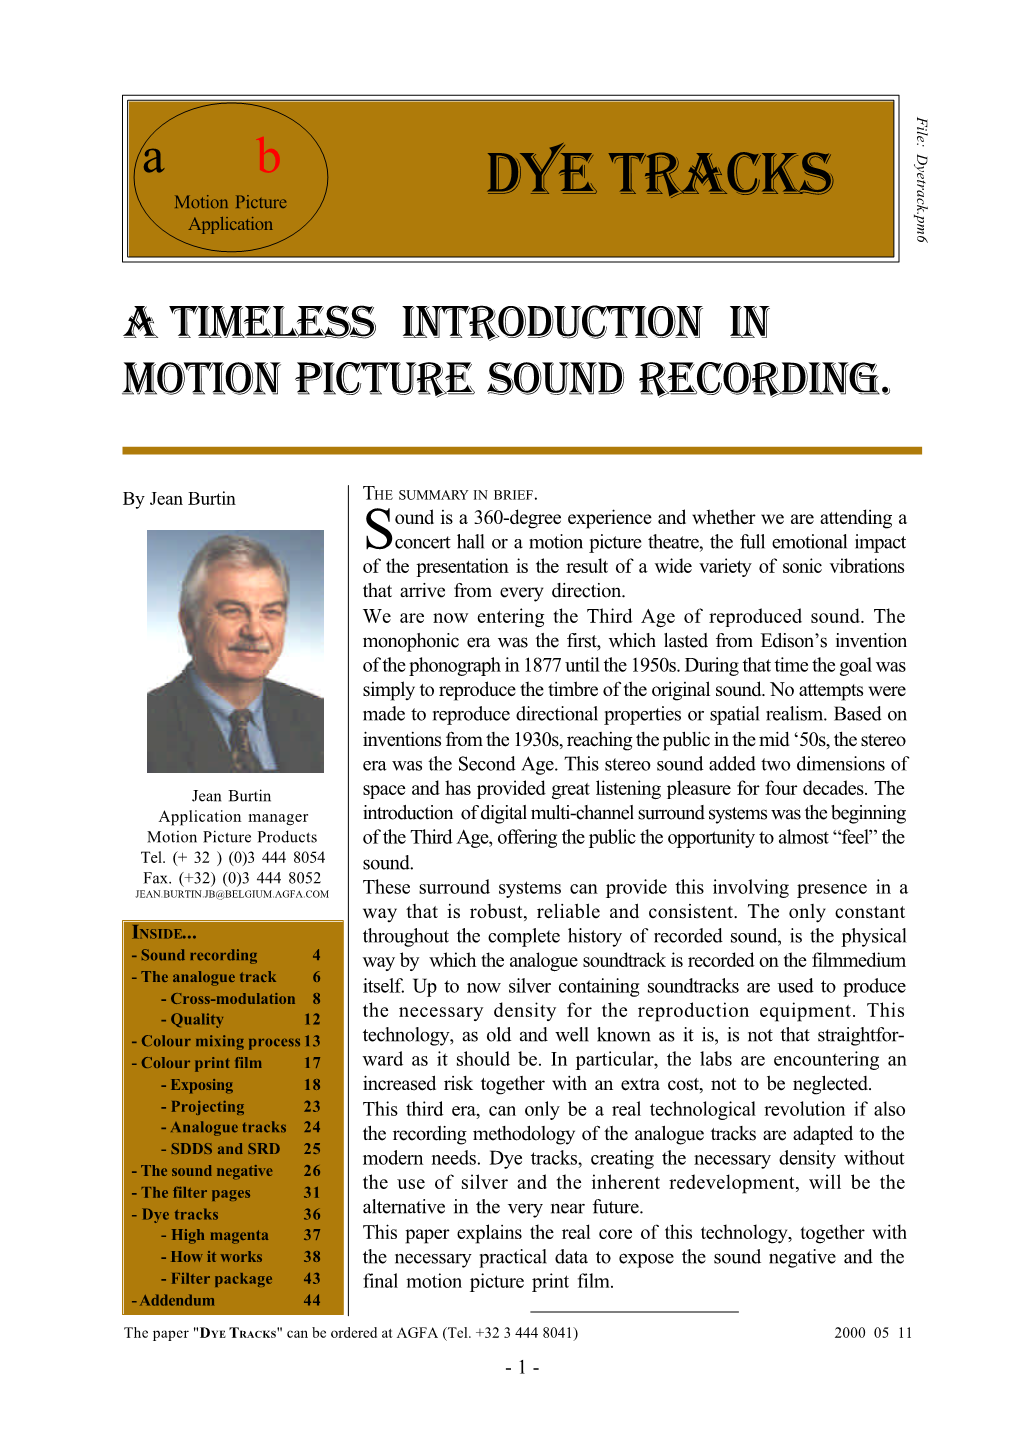 A Timeless Introduction in MOTION PICTURE SOUND RECORDING